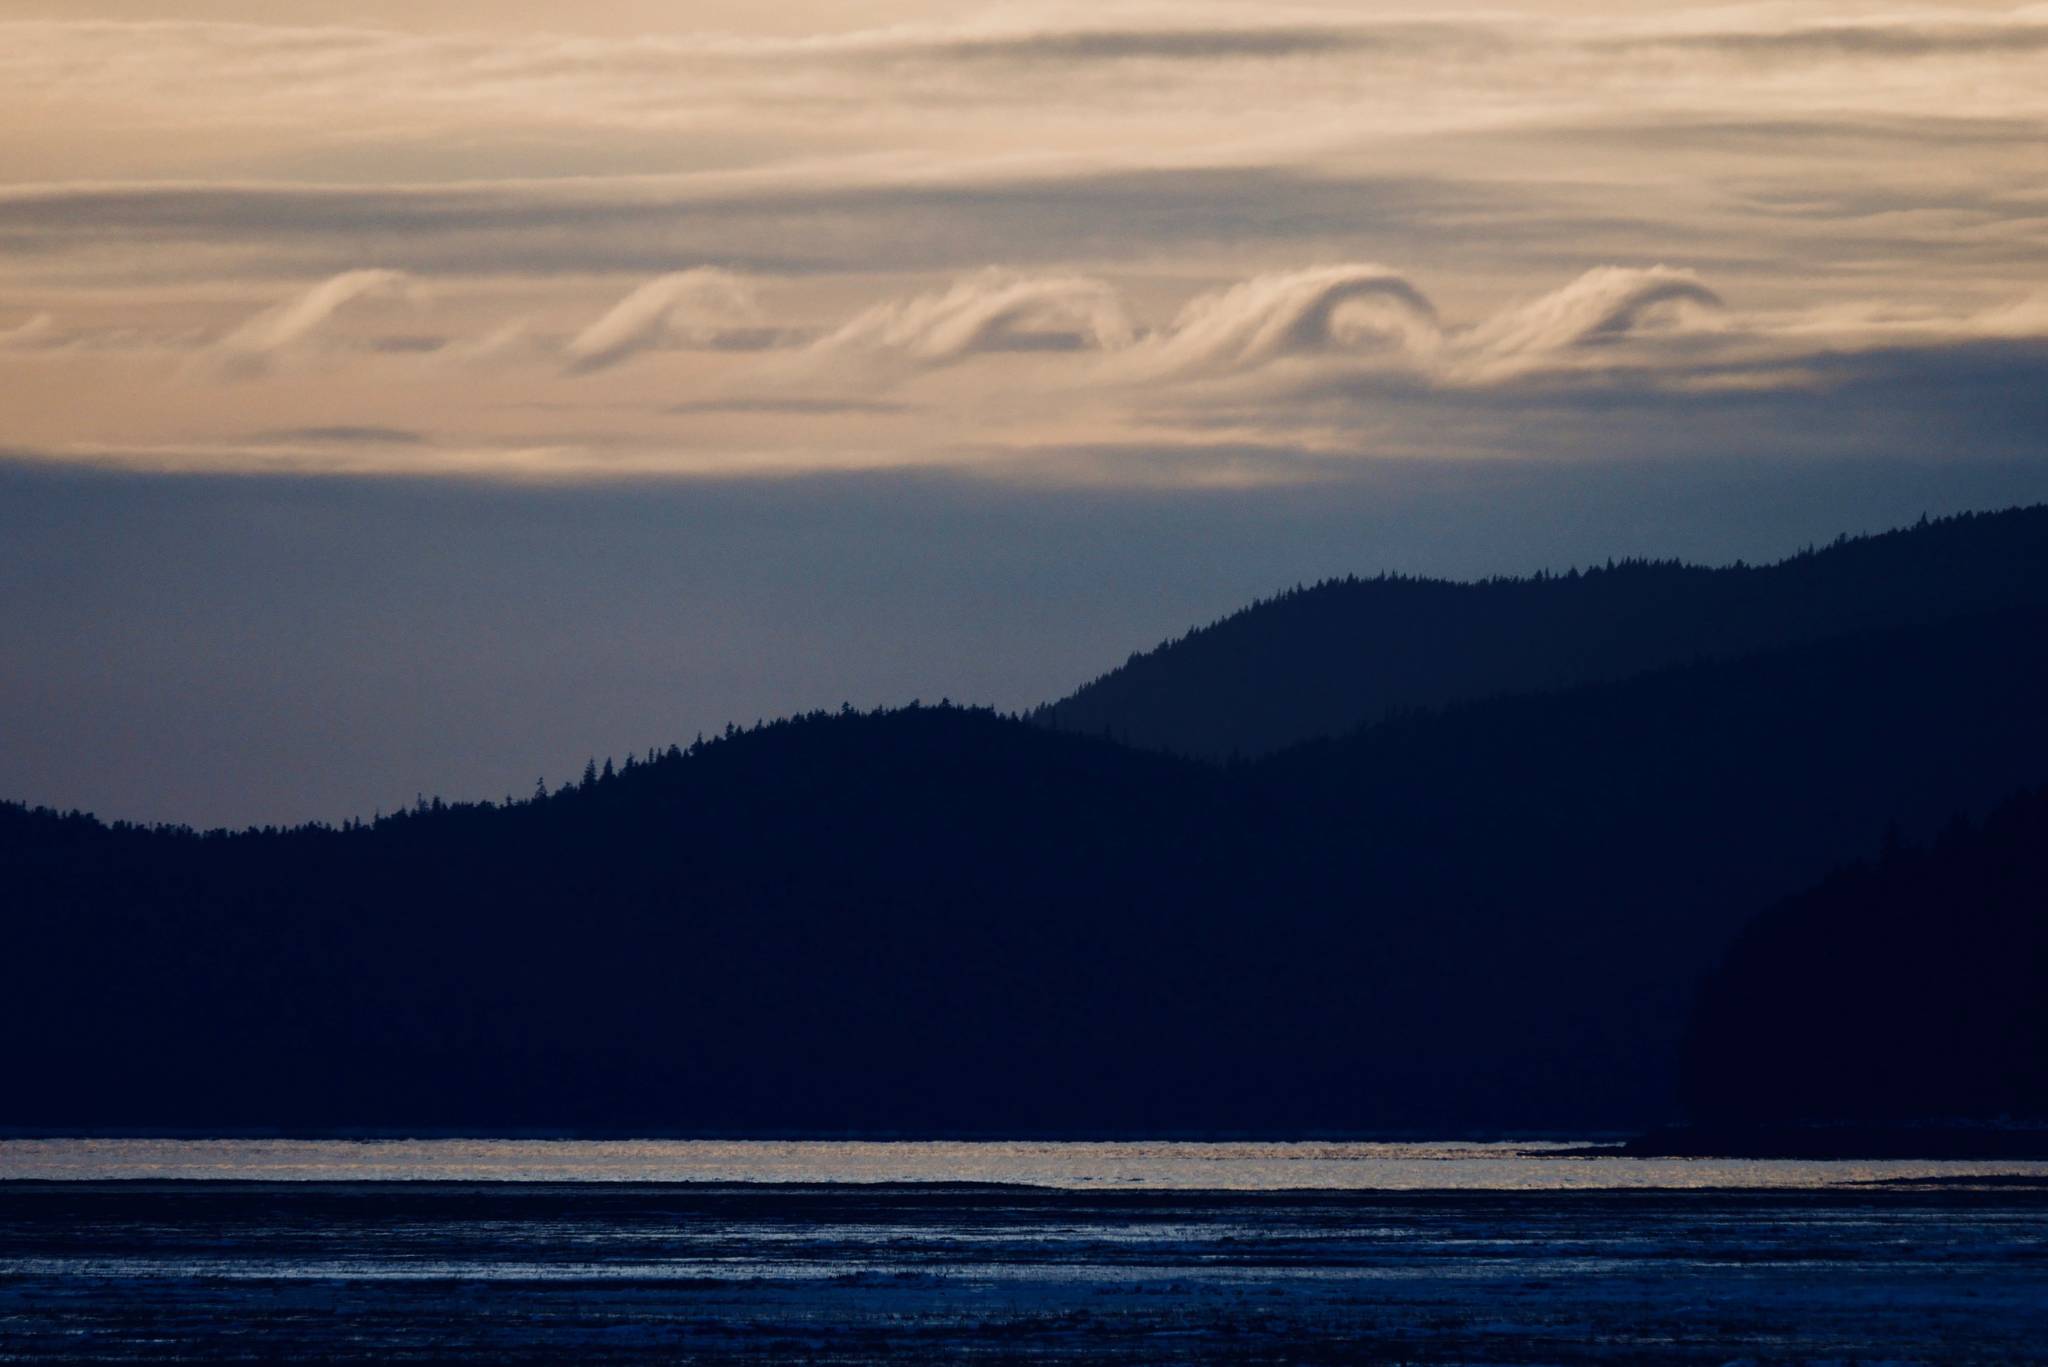 Kelvin-Helmholtz waves, generated by certain wind and stability conditions, sit at the cloud top. Viewed from Airport Dike Trail on Jan. 19, 2019. (Courtesy Photo | Janine Reep)